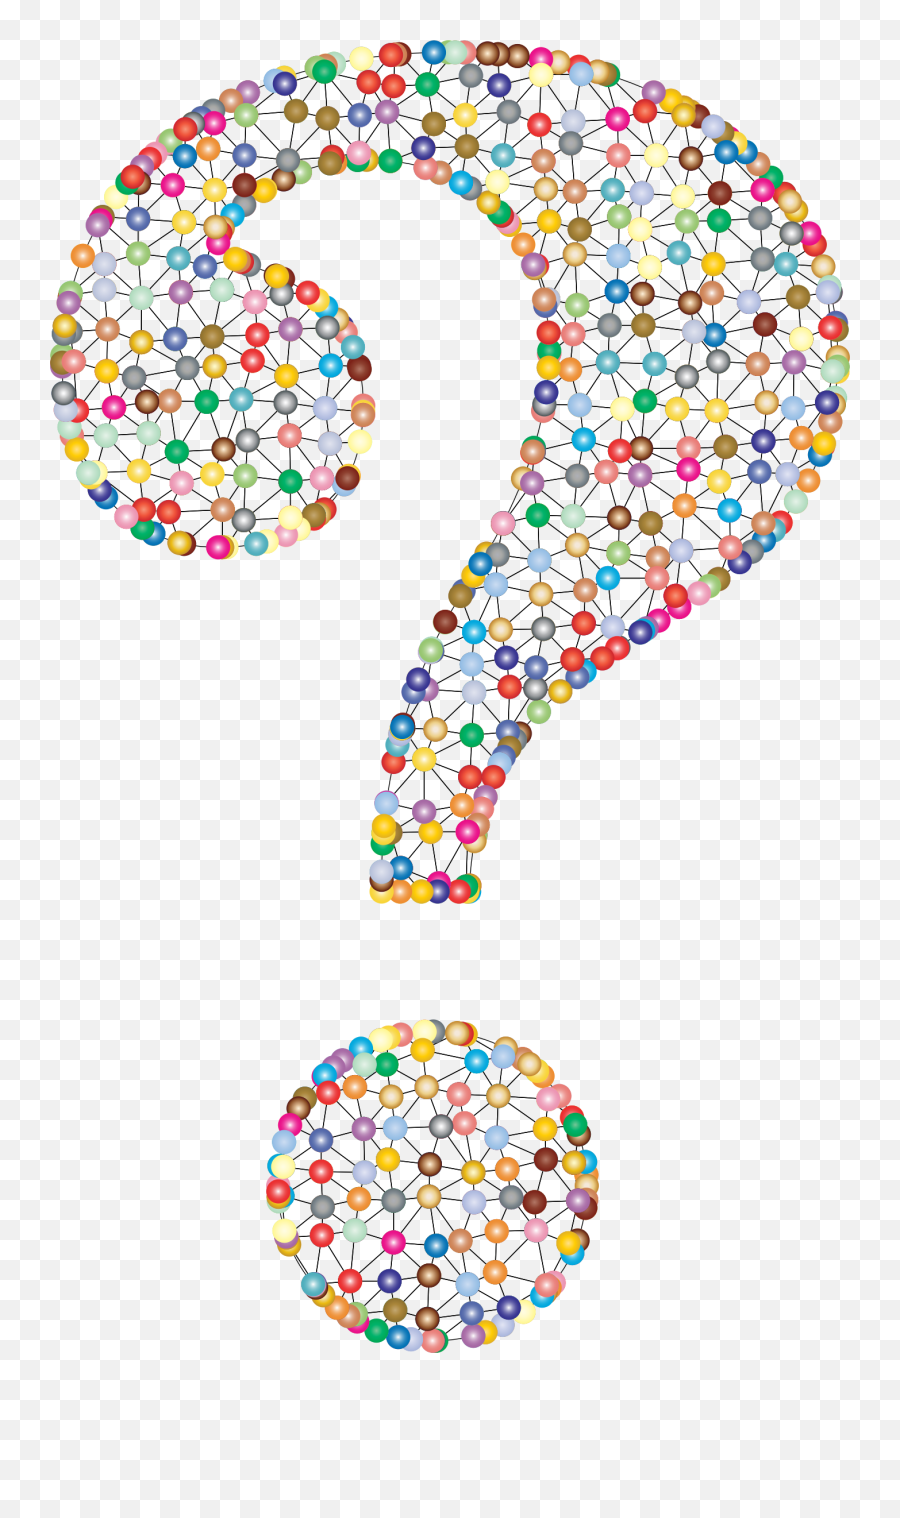 Lets Move Our - Asking Questions Clipart Free Emoji,Emoticon Tanda Tanya